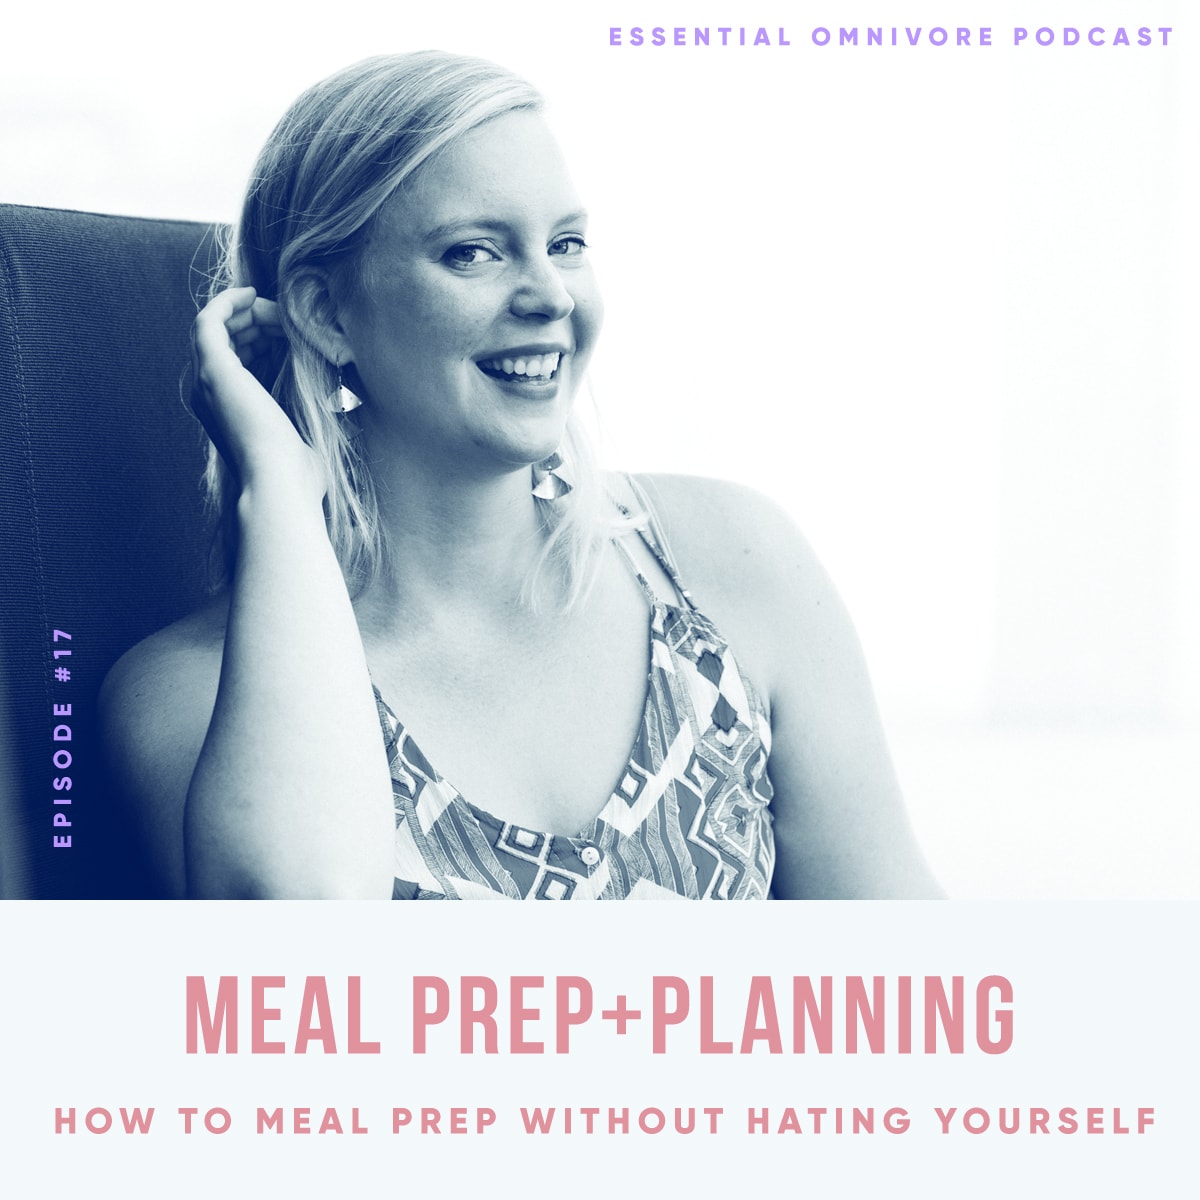 Meal Planning For Beginners